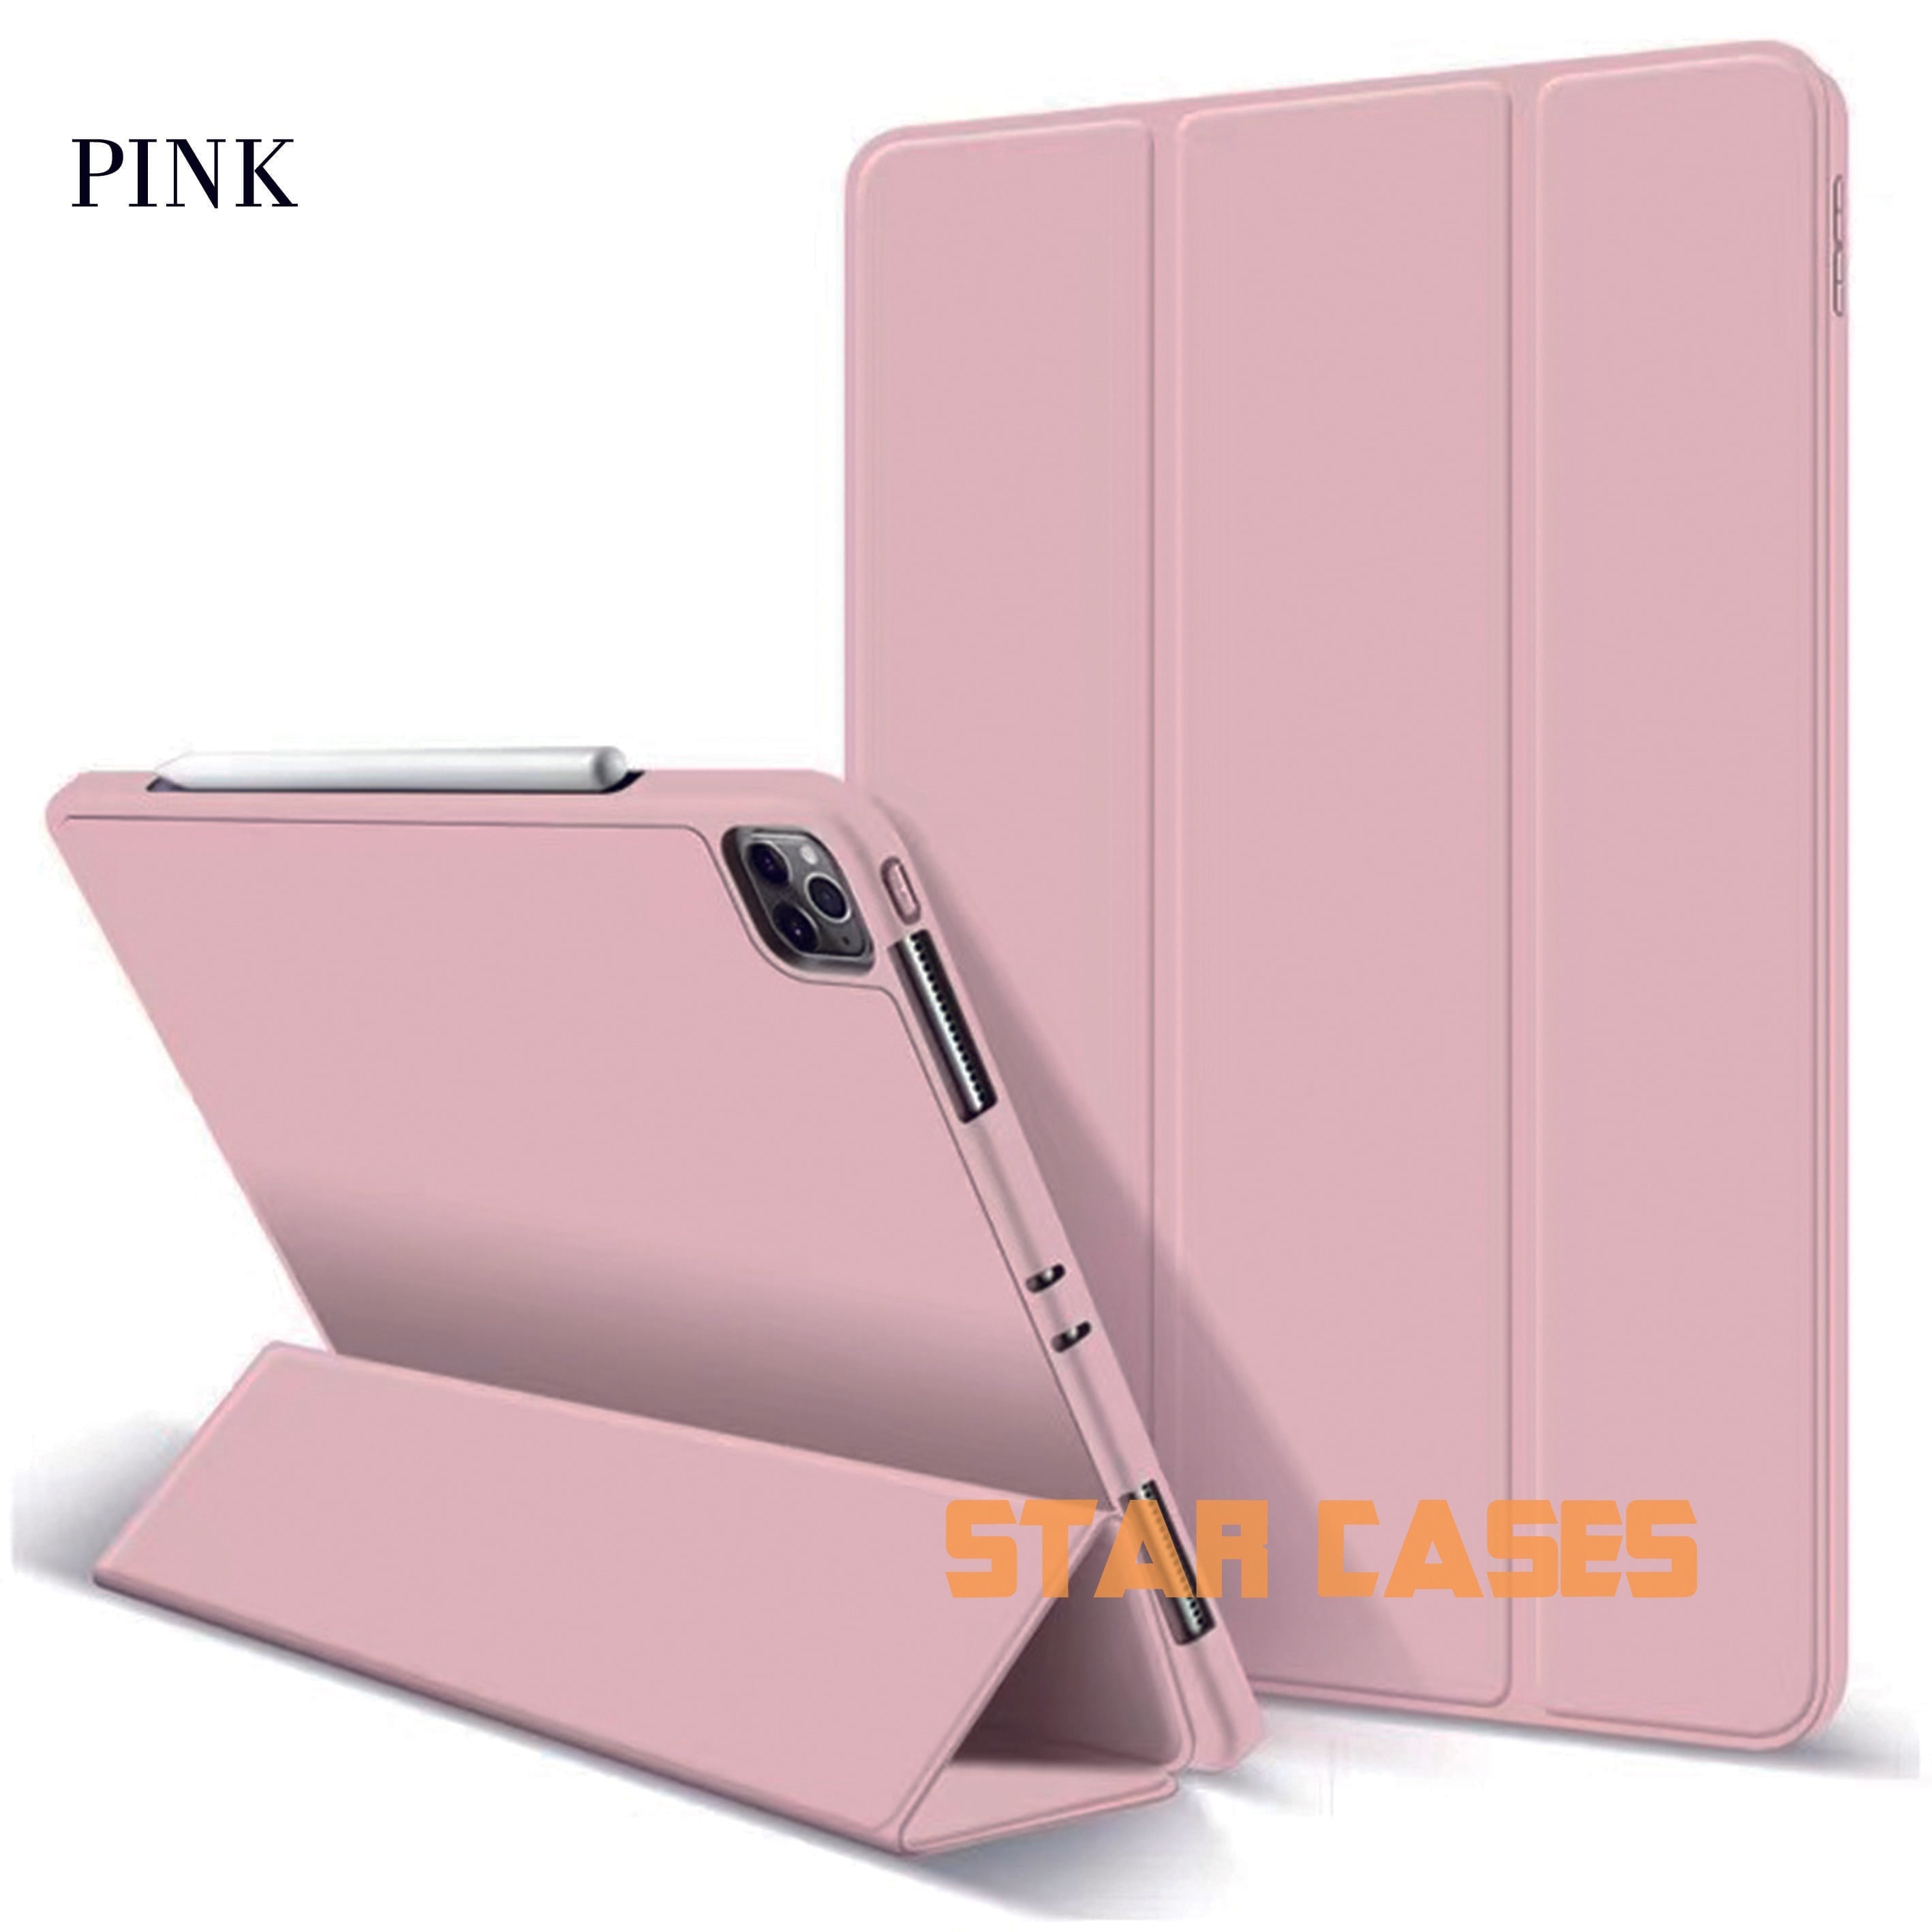 iPad Air4/5 10.9 inch Silicone Pen Holder Case